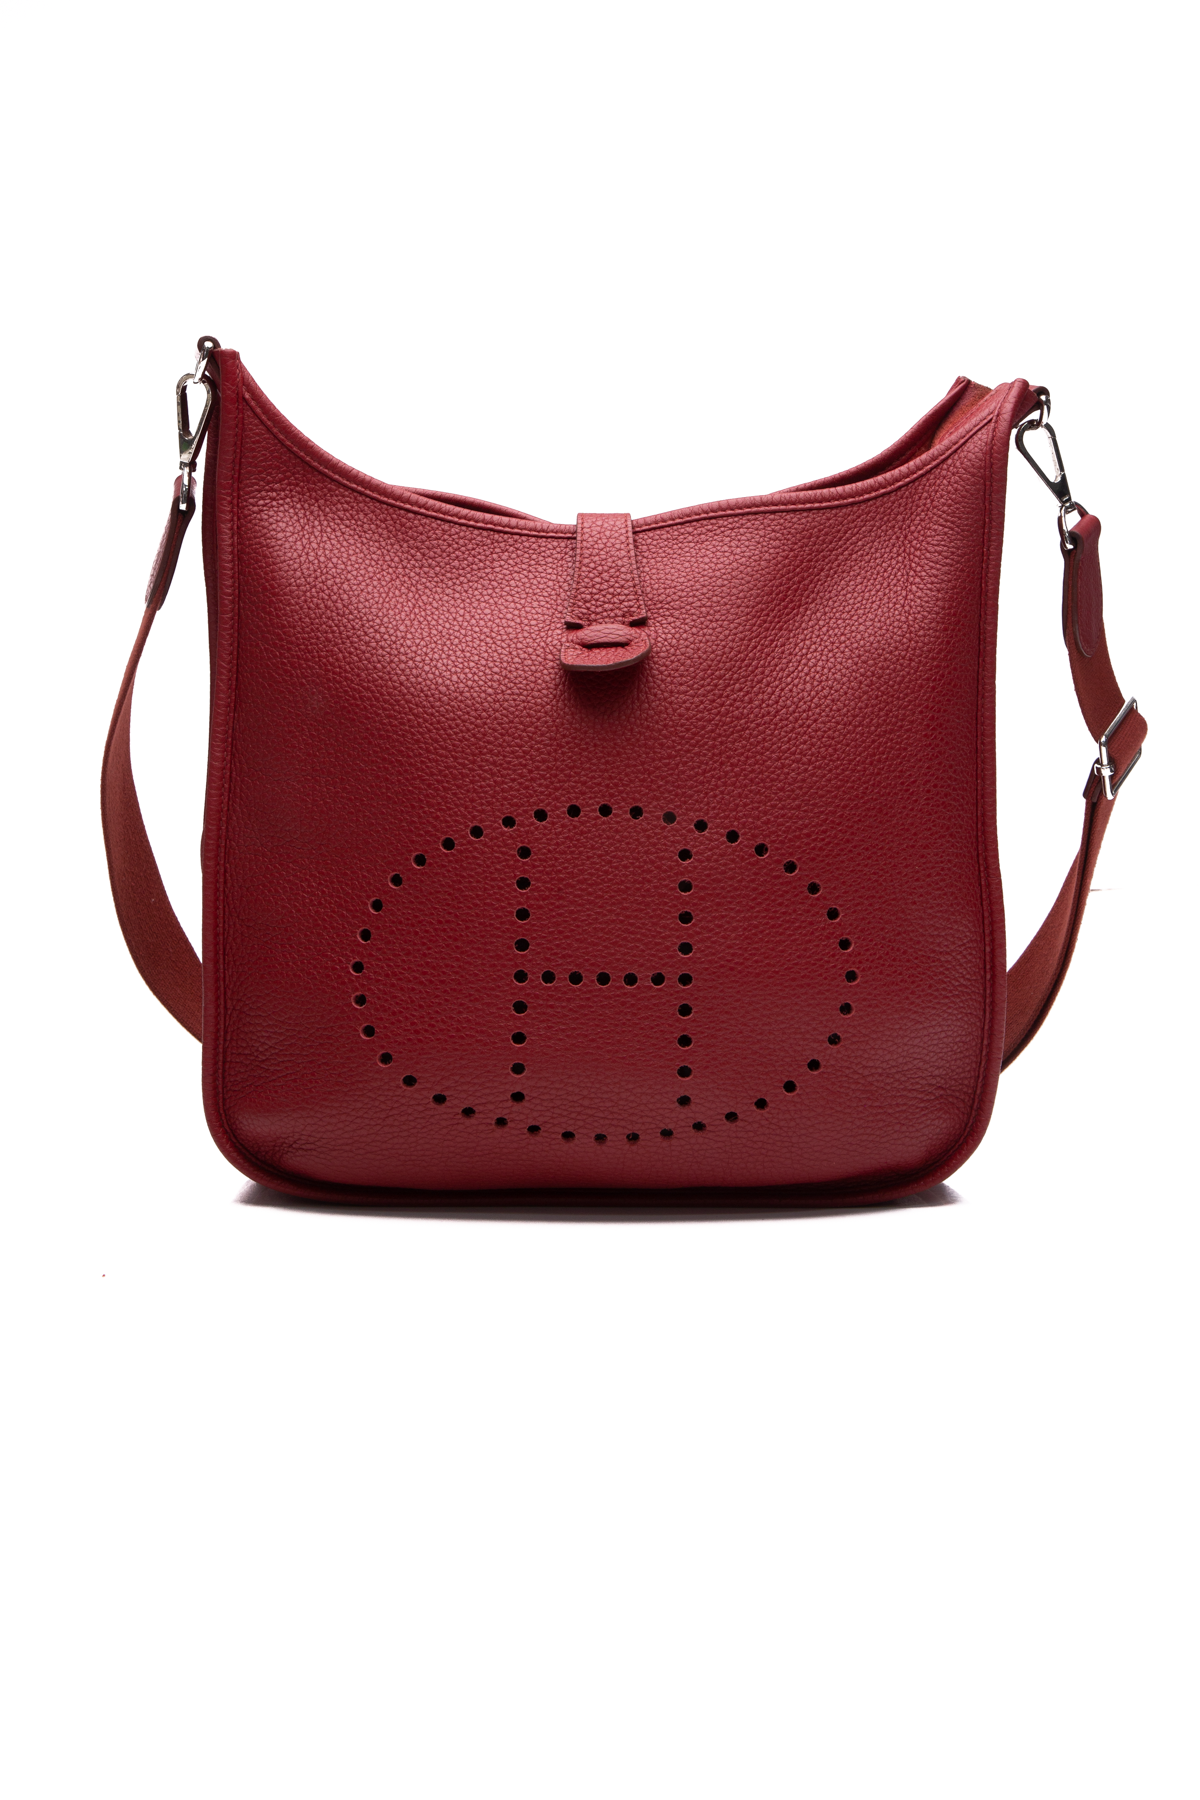 Hermes Evelyne bag, in soft leather with a non-adjustable strap